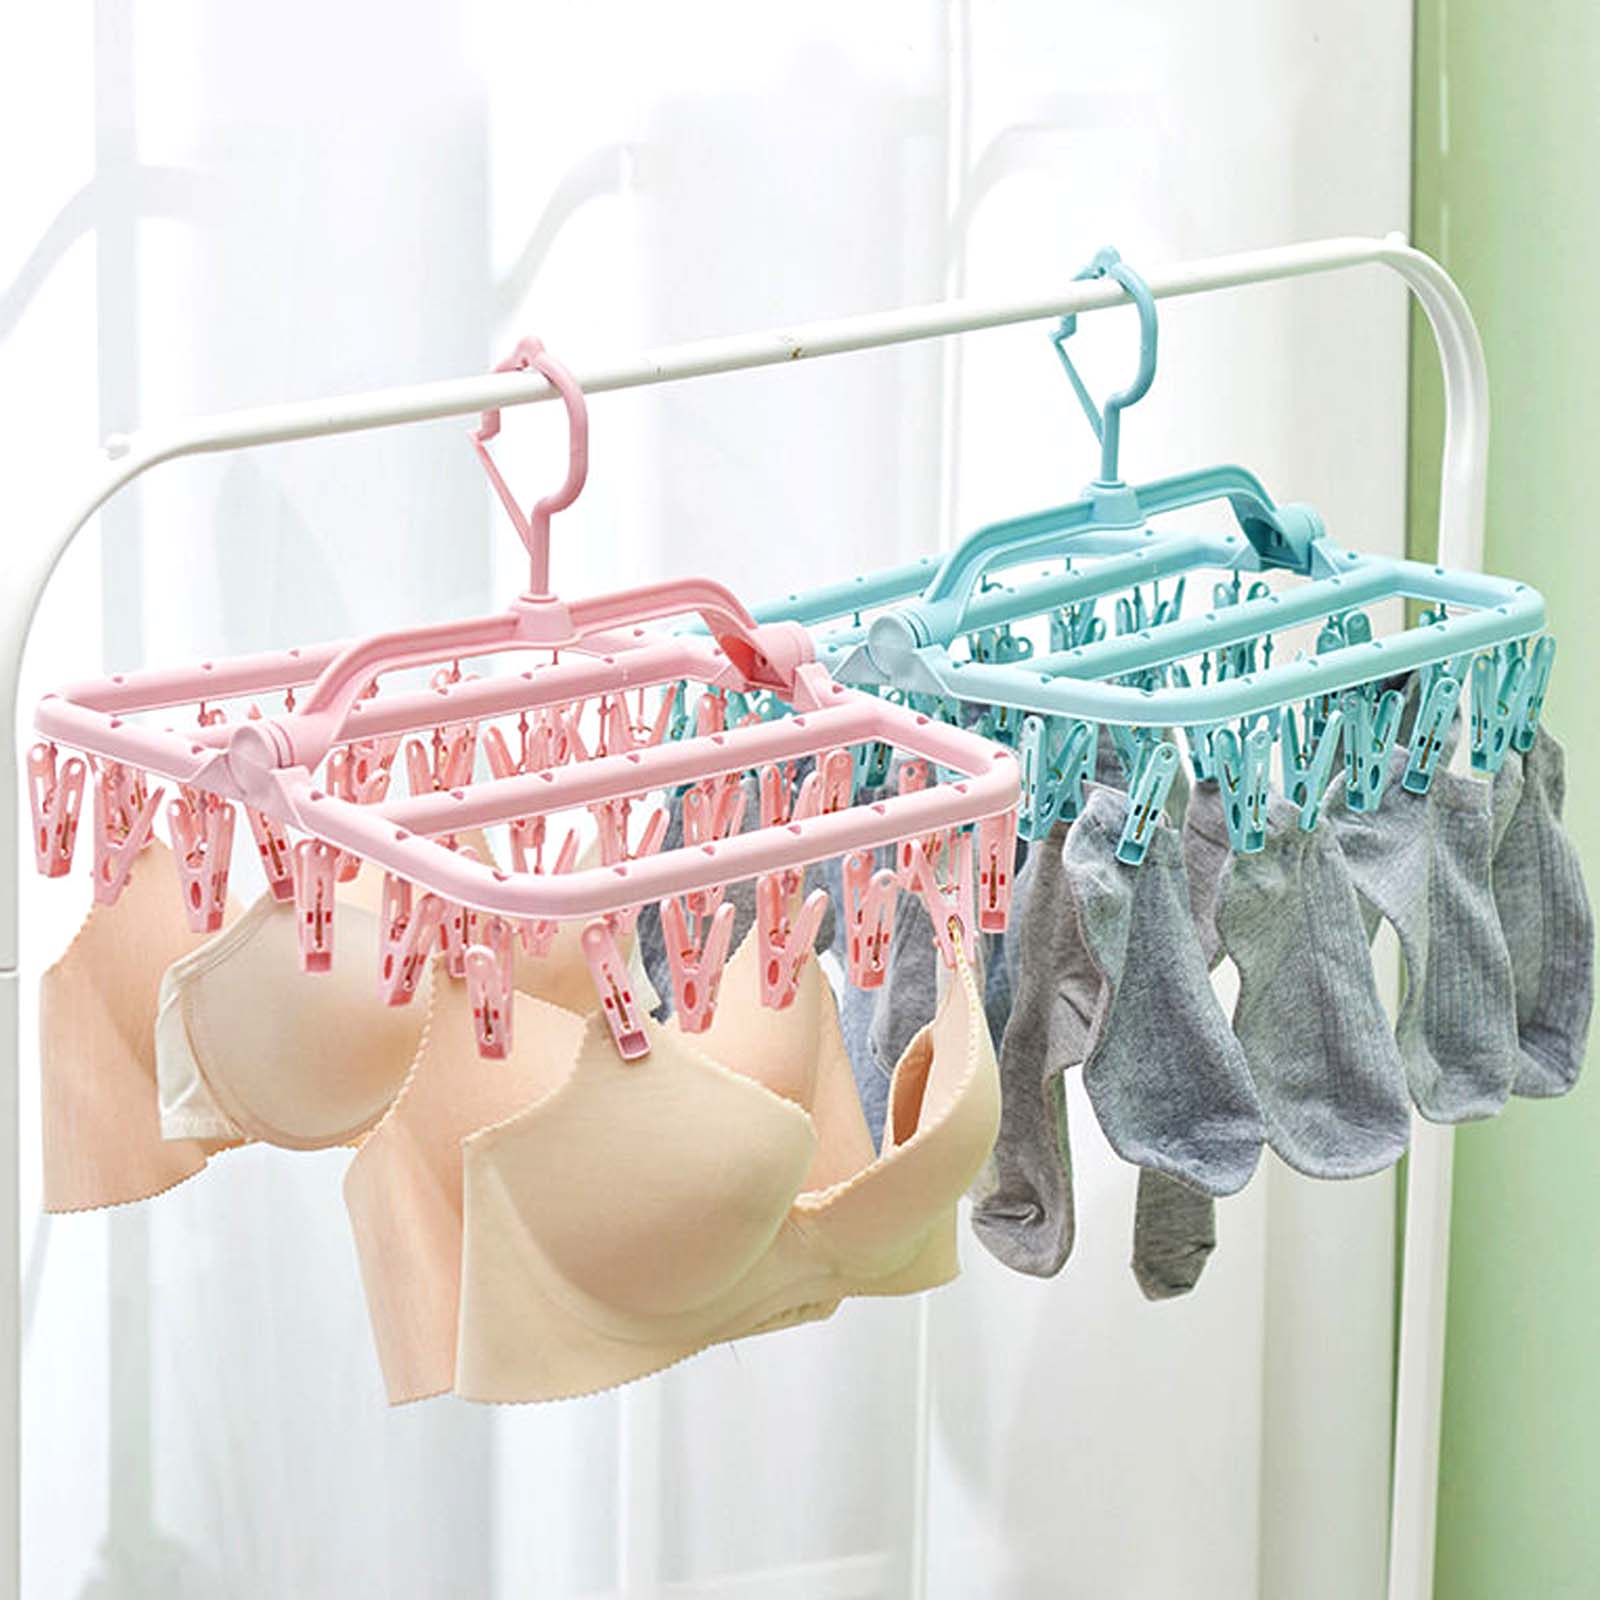 YBM Home Underwear Drying Rack with 10 Clips to Dry Towels, Bras, Socks, Baby Clothes, Lingerie and Linens - Stainless Steel Laundry Hanging Rack